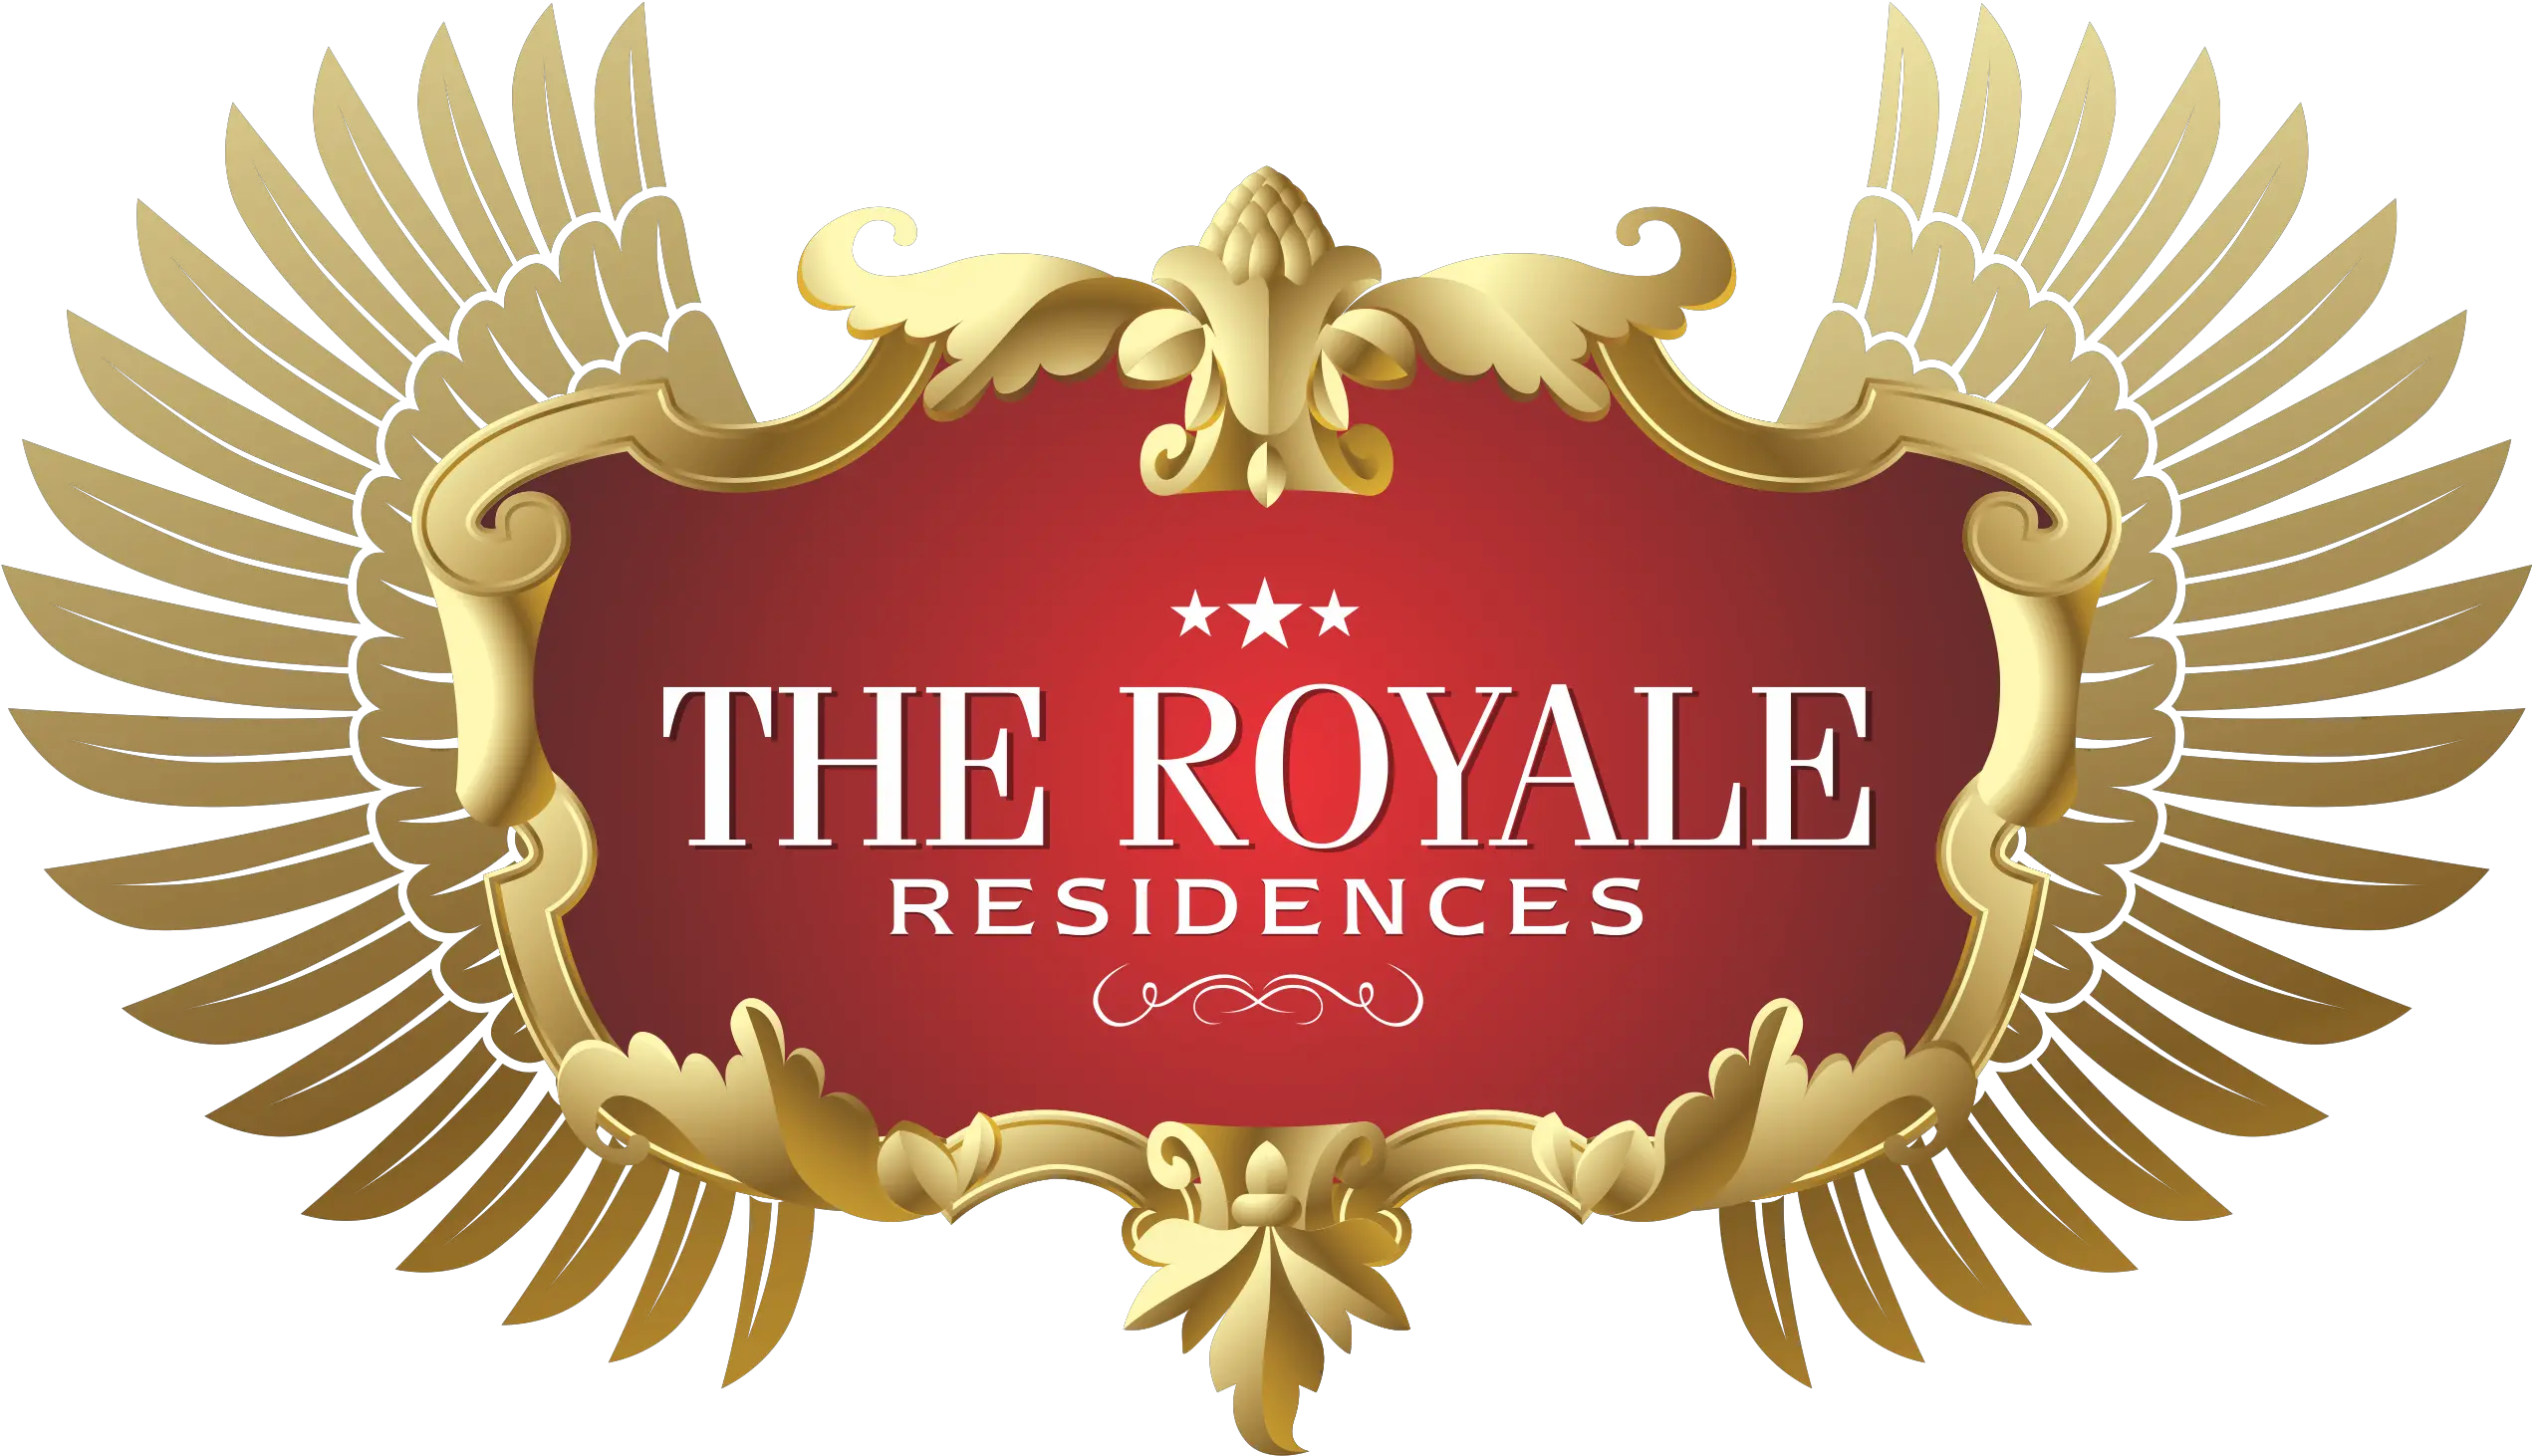 Royal Vector Luxury Picture Png Logos